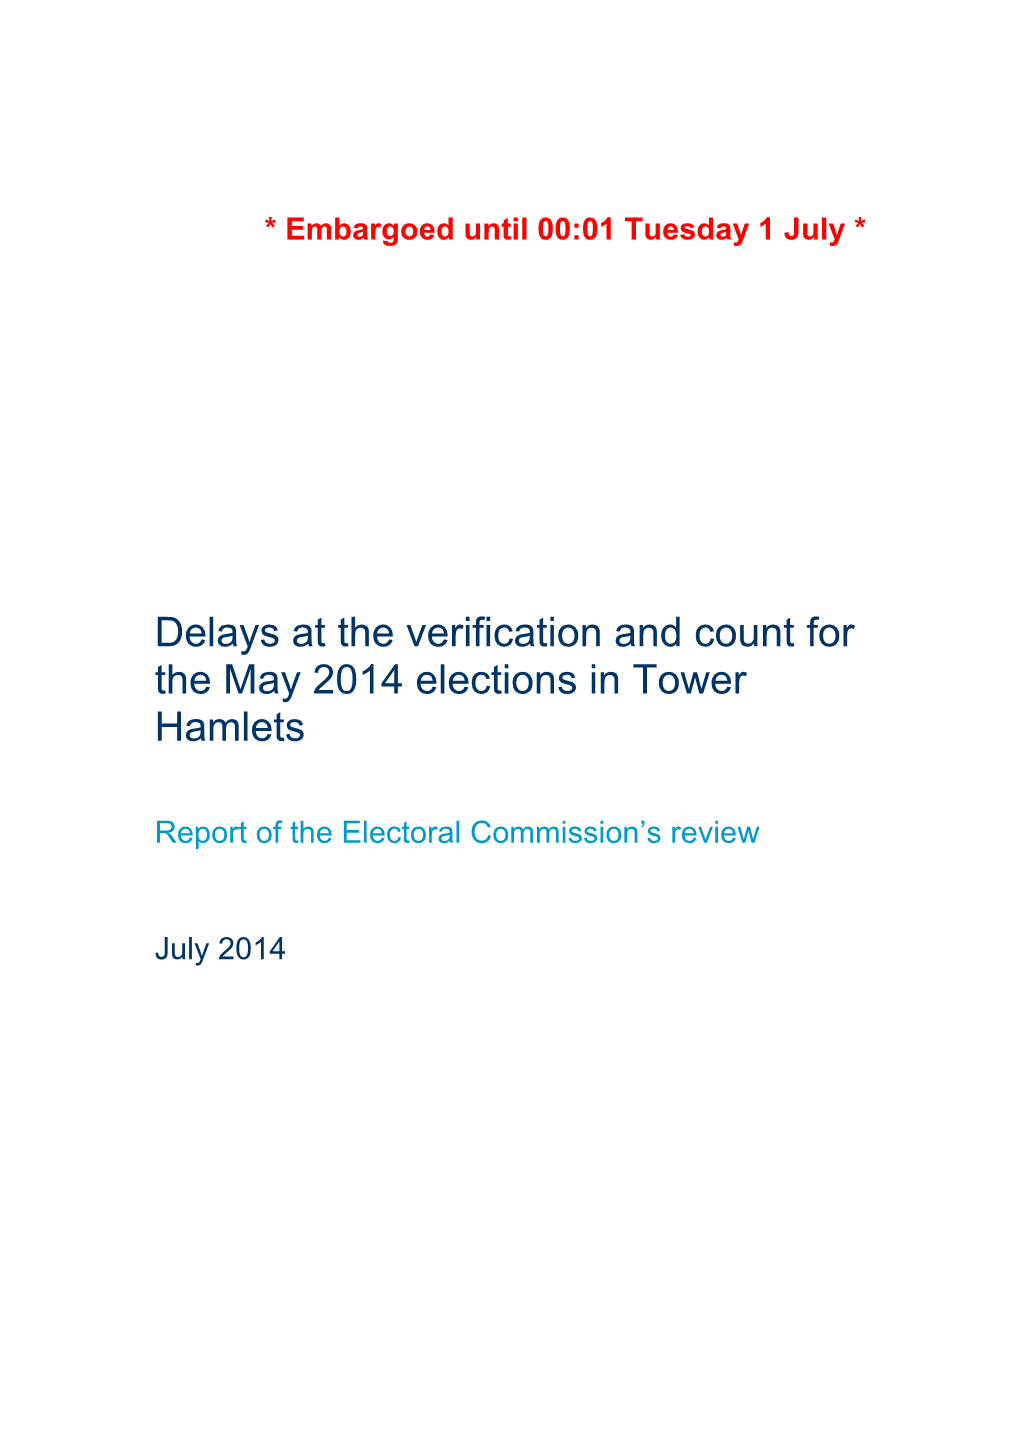 Delays at the Verification and Count for the May 2014 Elections in Tower Hamlets